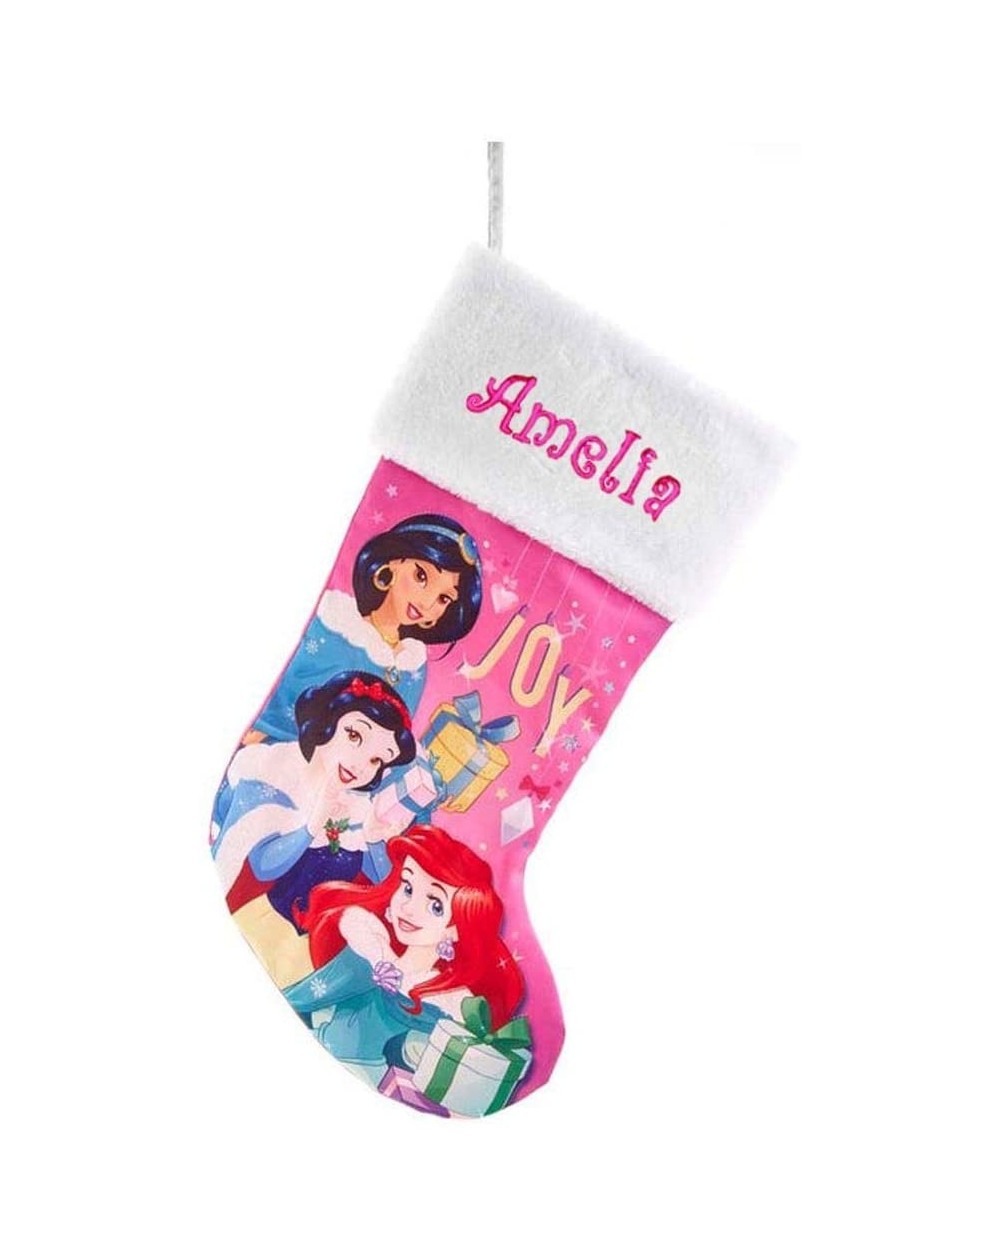 Stockings & Holders Personalized Licensed Character Christmas Stocking (Disney Princess) - Disney Princess - C4192CEAHSR $36.21